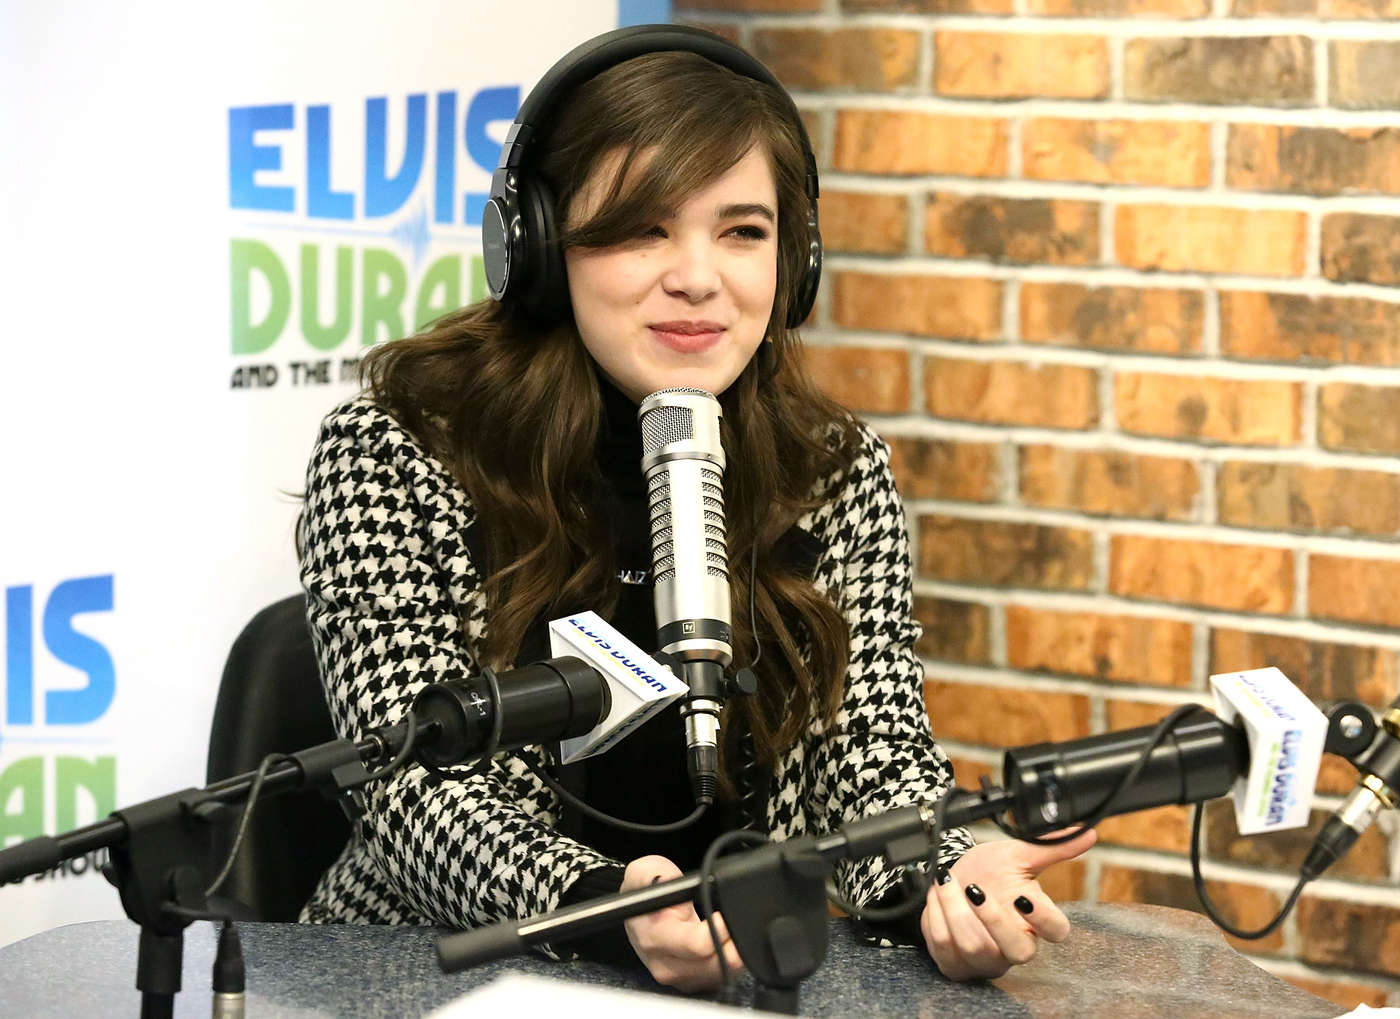 Hailee Steinfeld at The Elvis Duran Z100 Morning Show in NYC